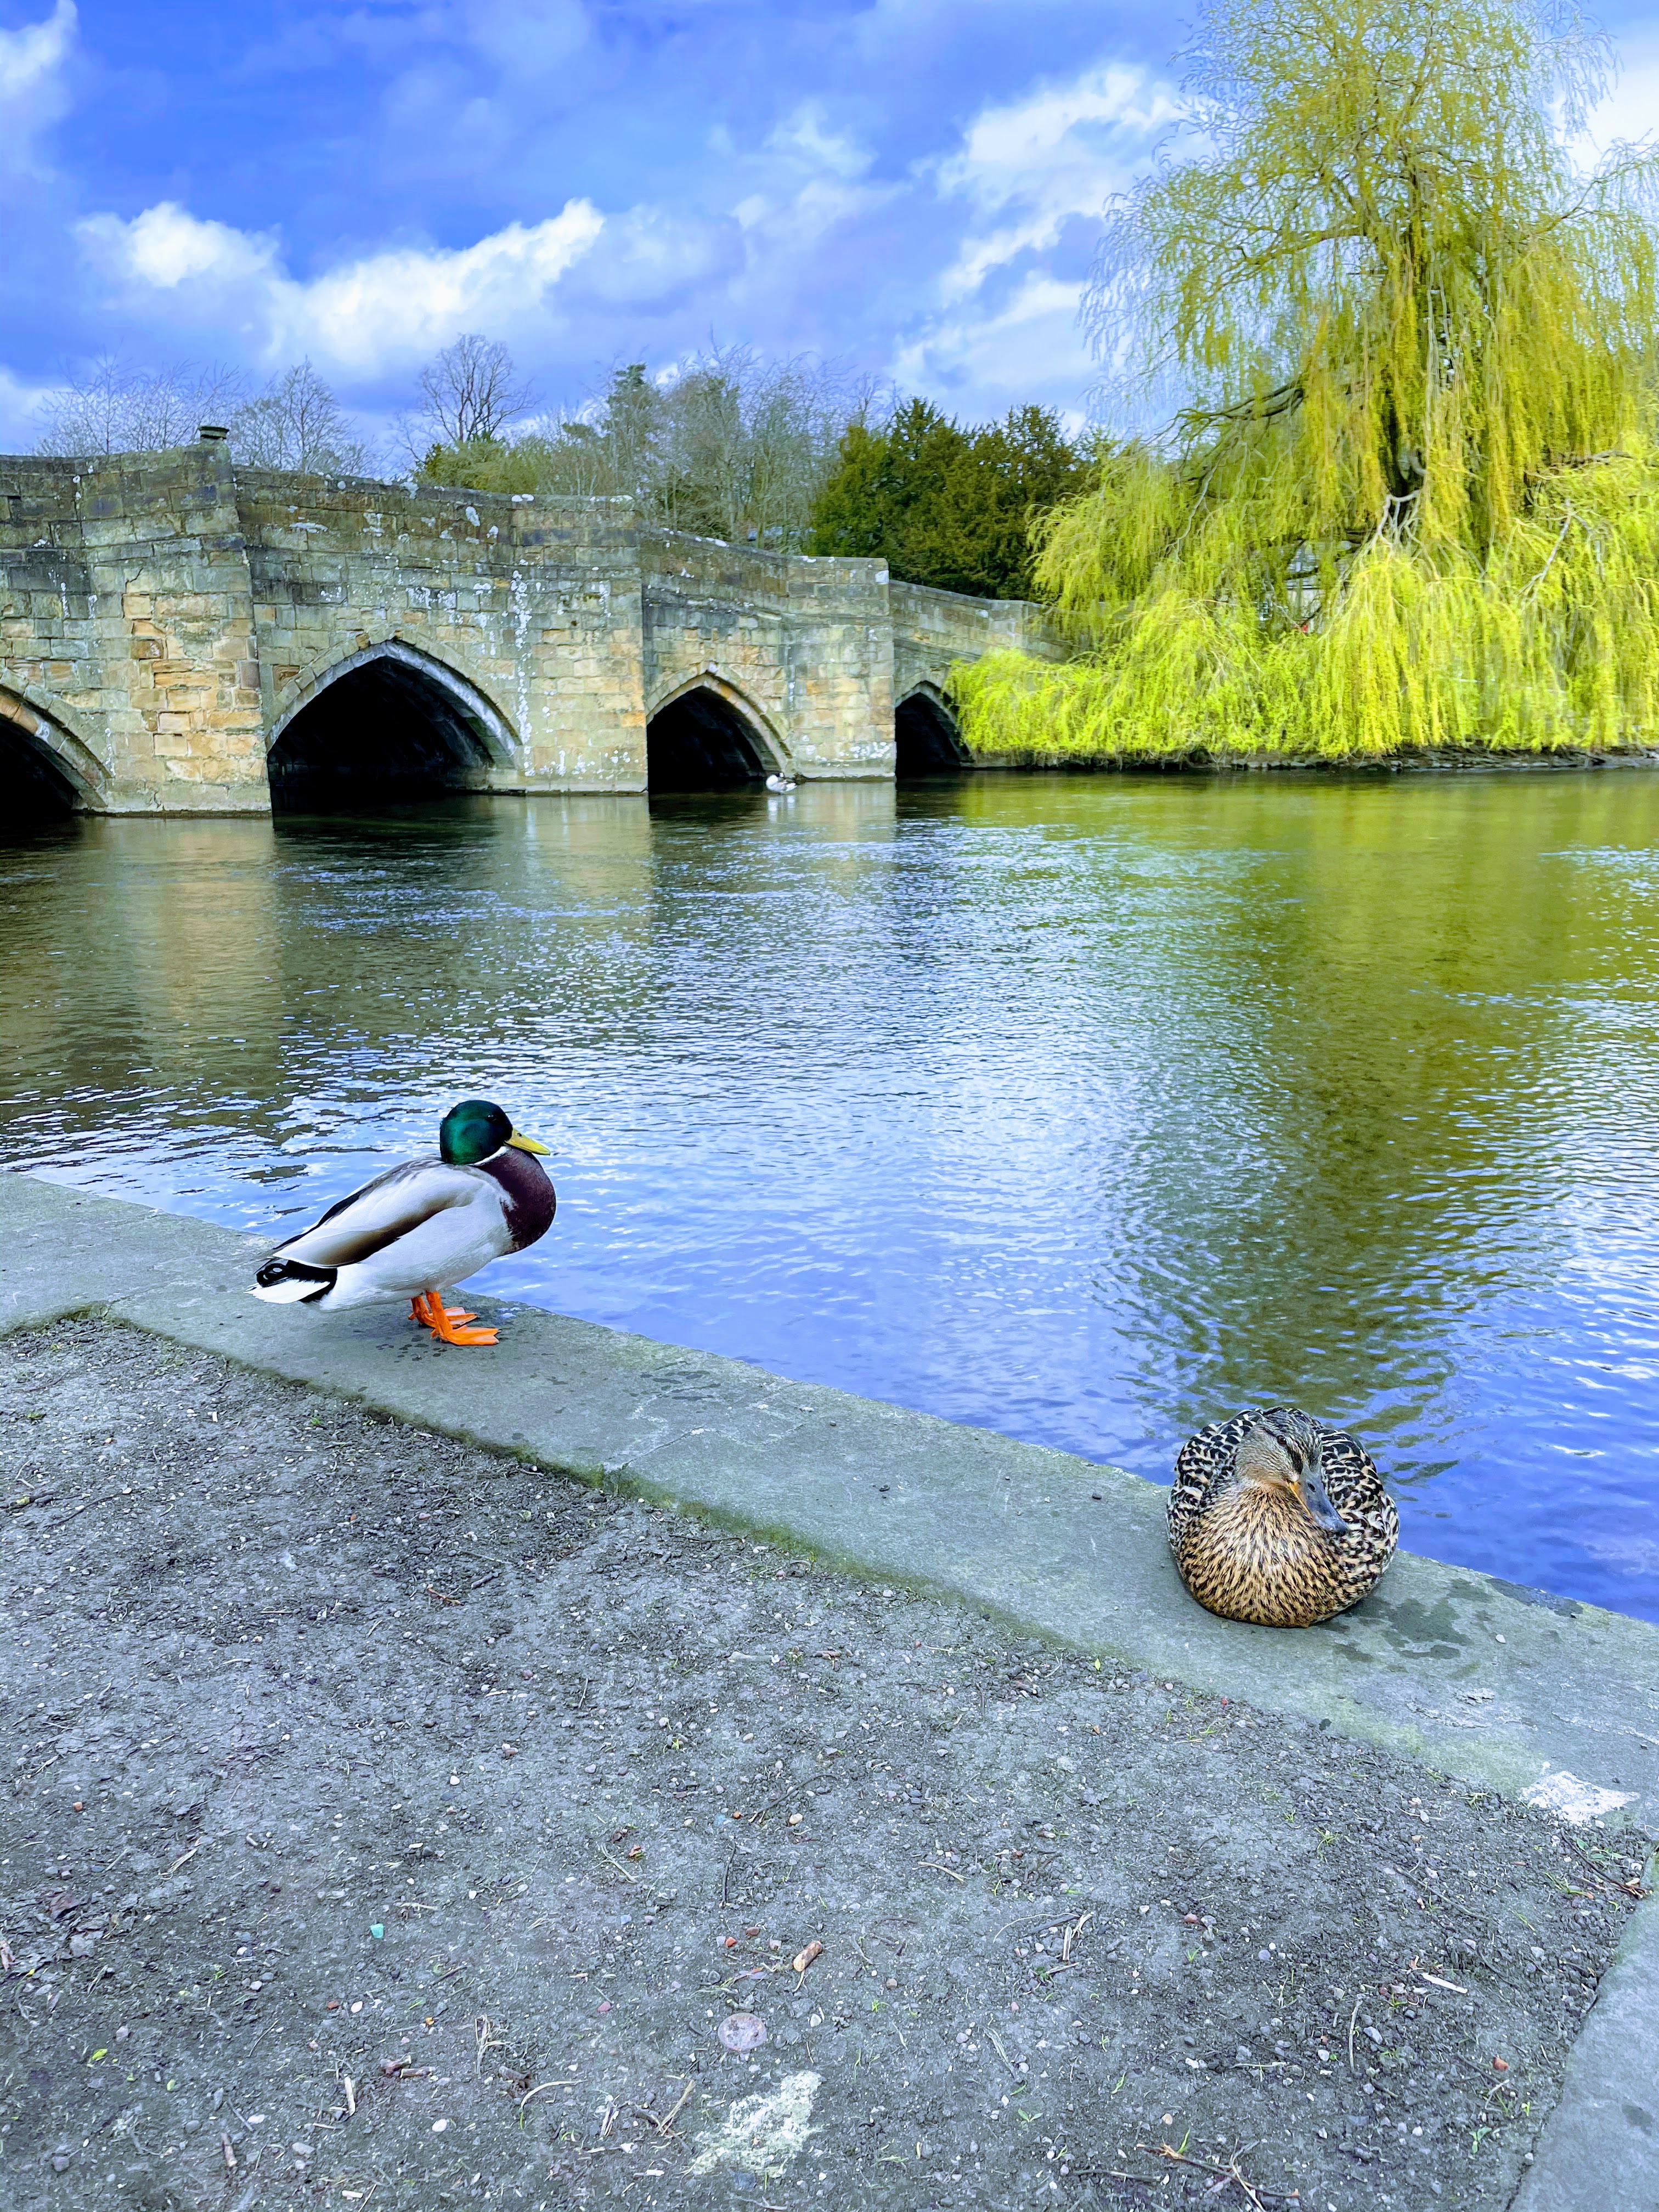 A Day Out In Derbyshire Has To Include Bakewell: